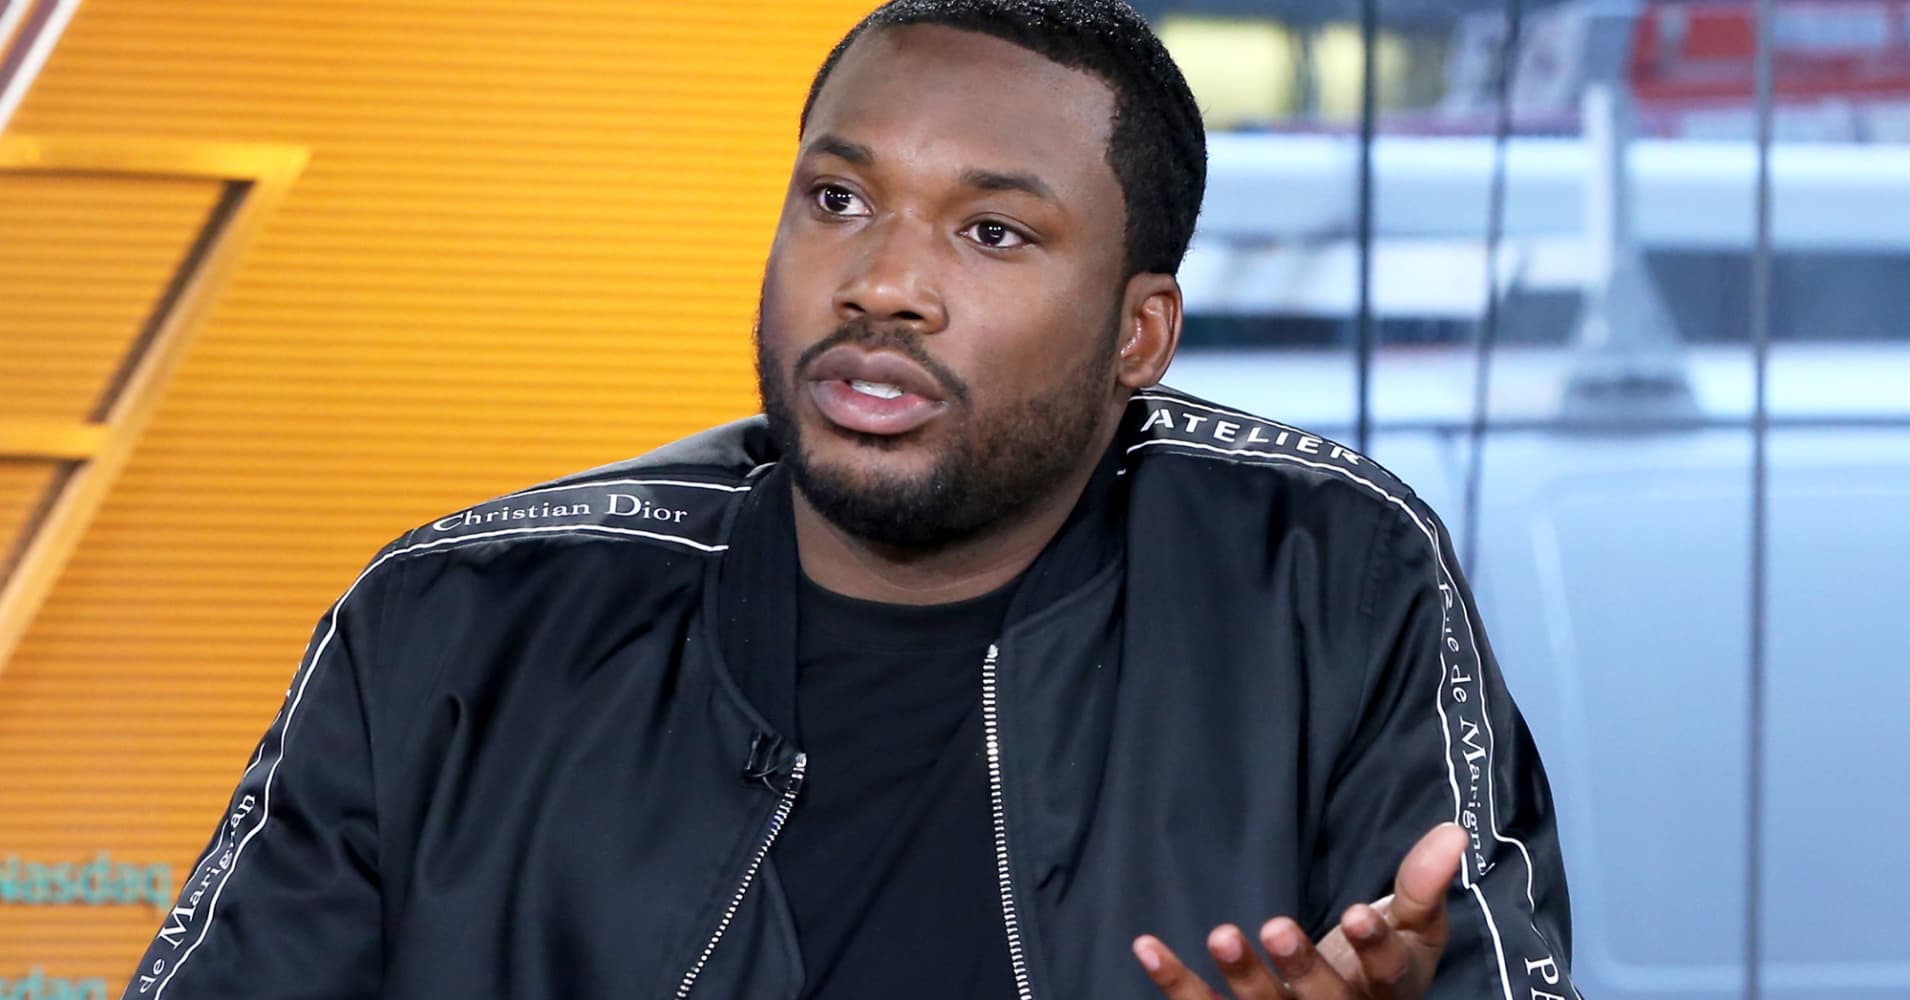 Rapper Meek Mill blames 'atmosphere and circumstance,' not race, for lengthy jail sentence